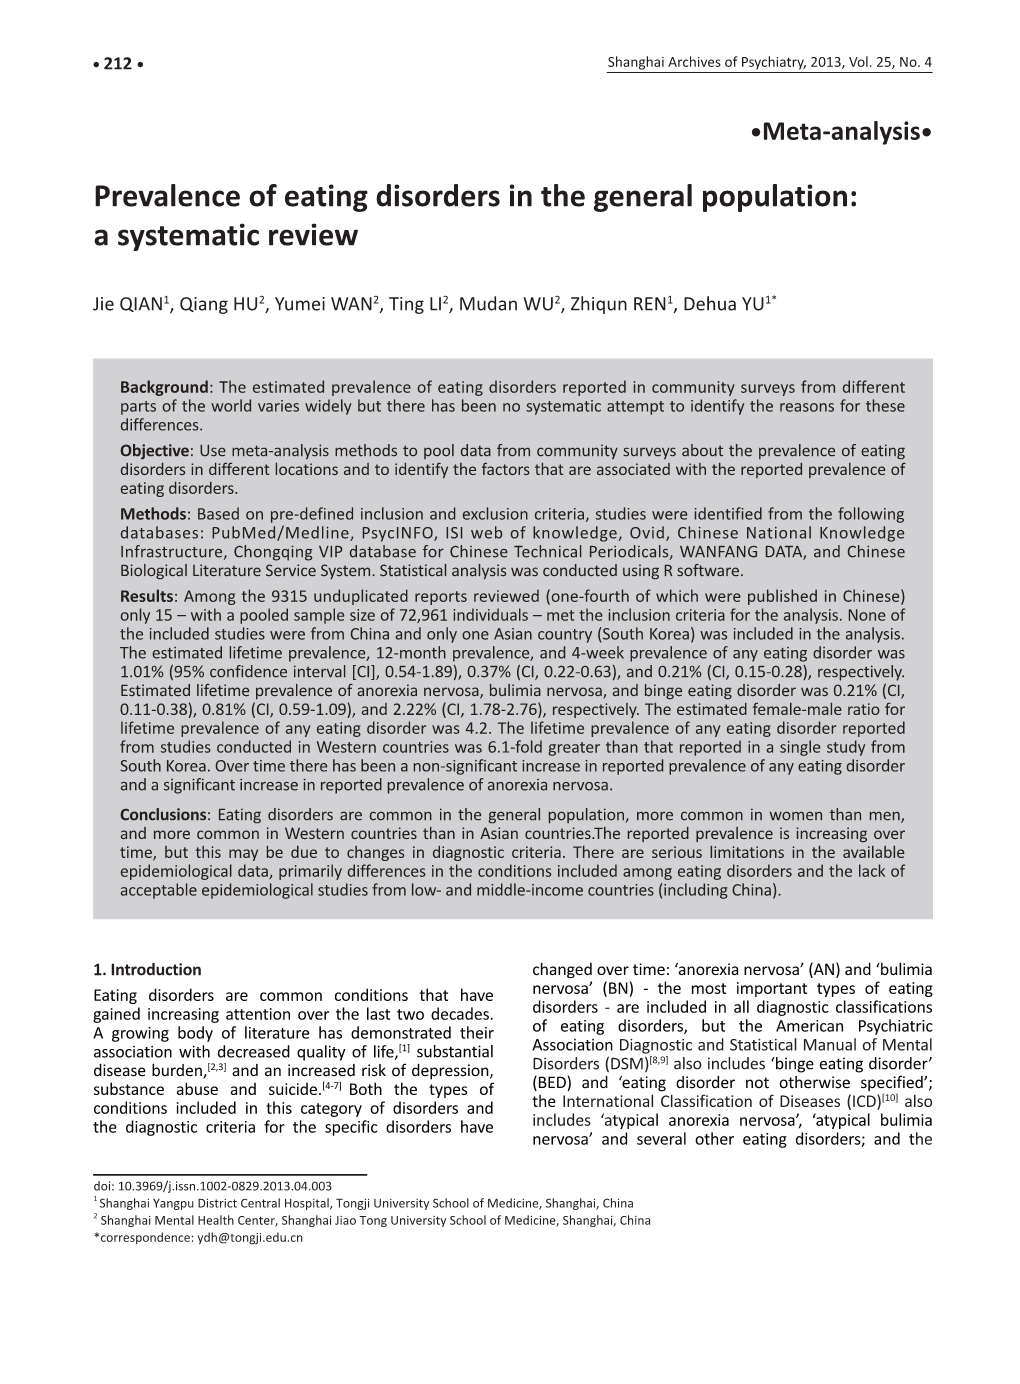 Prevalence of Eating Disorders in the General Population: a Systematic Review